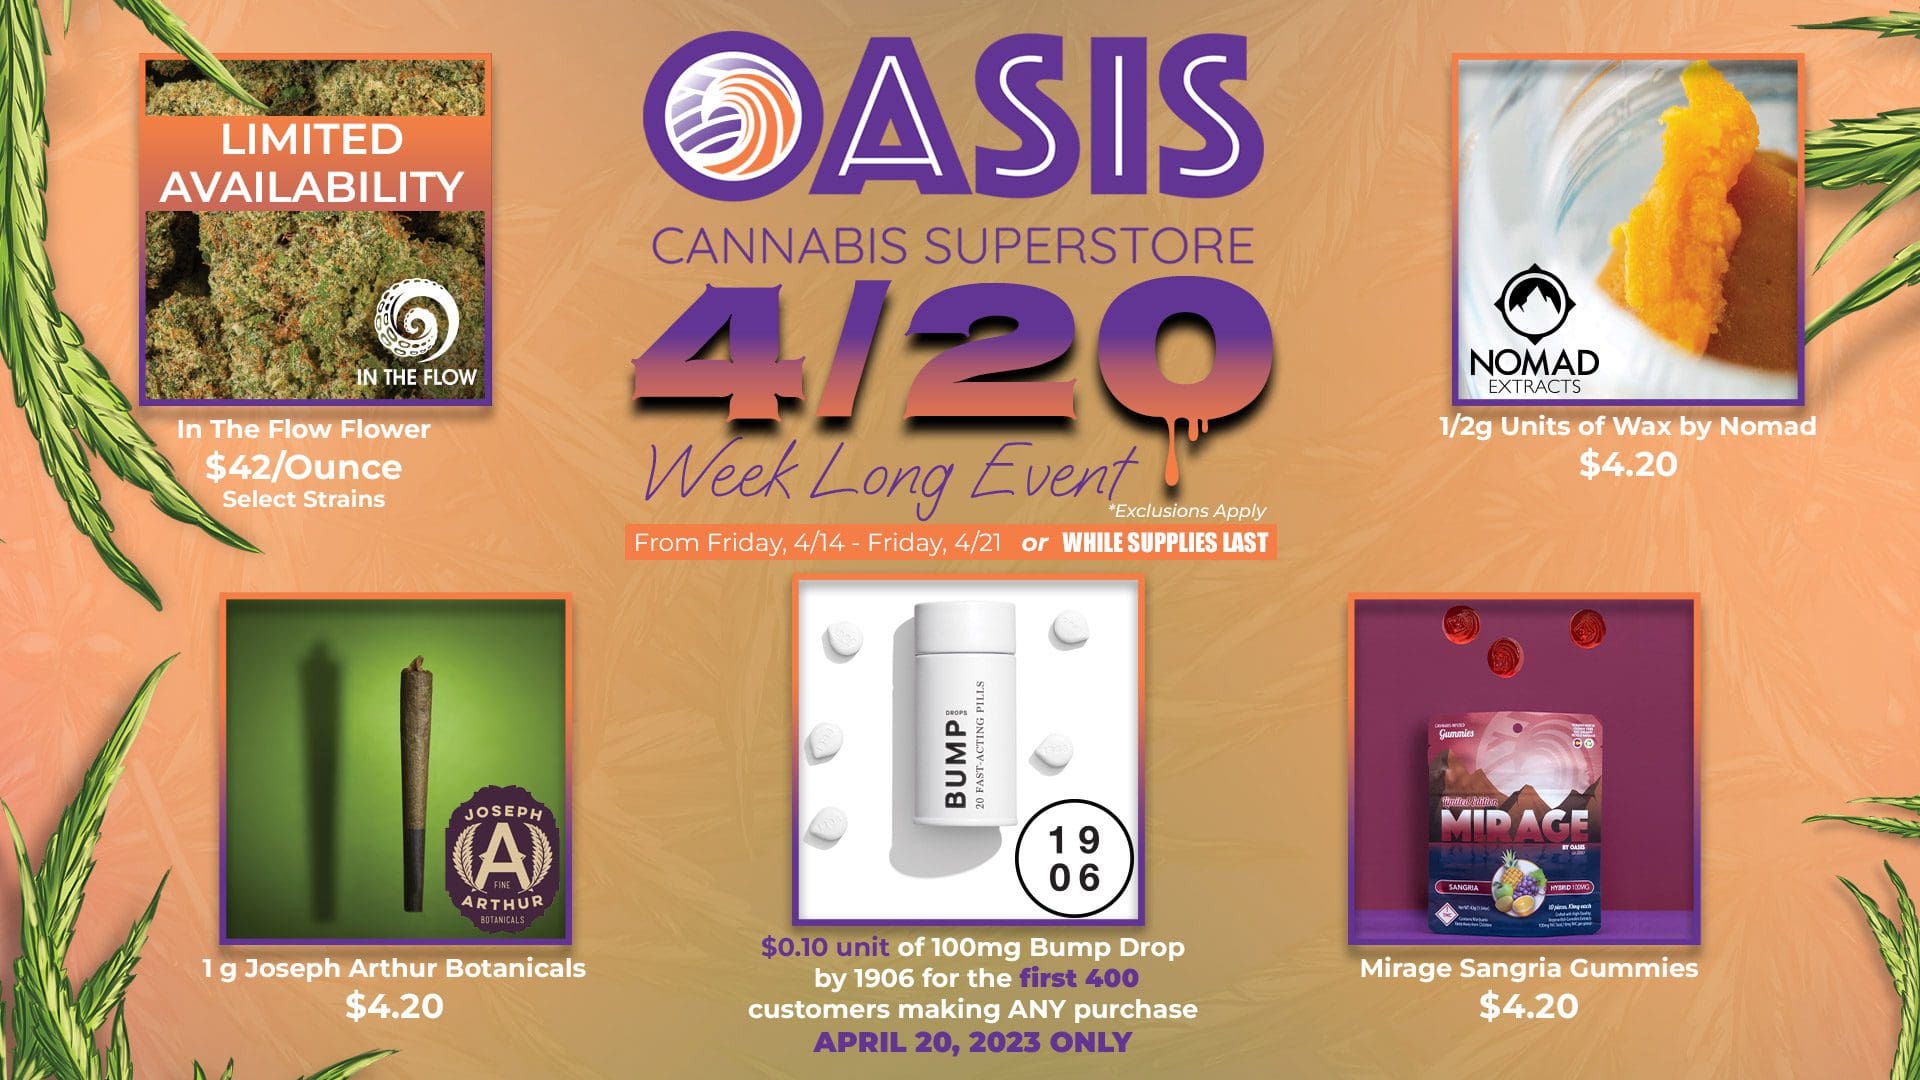 Oasis 420 special sales items expire on 4-21-23.